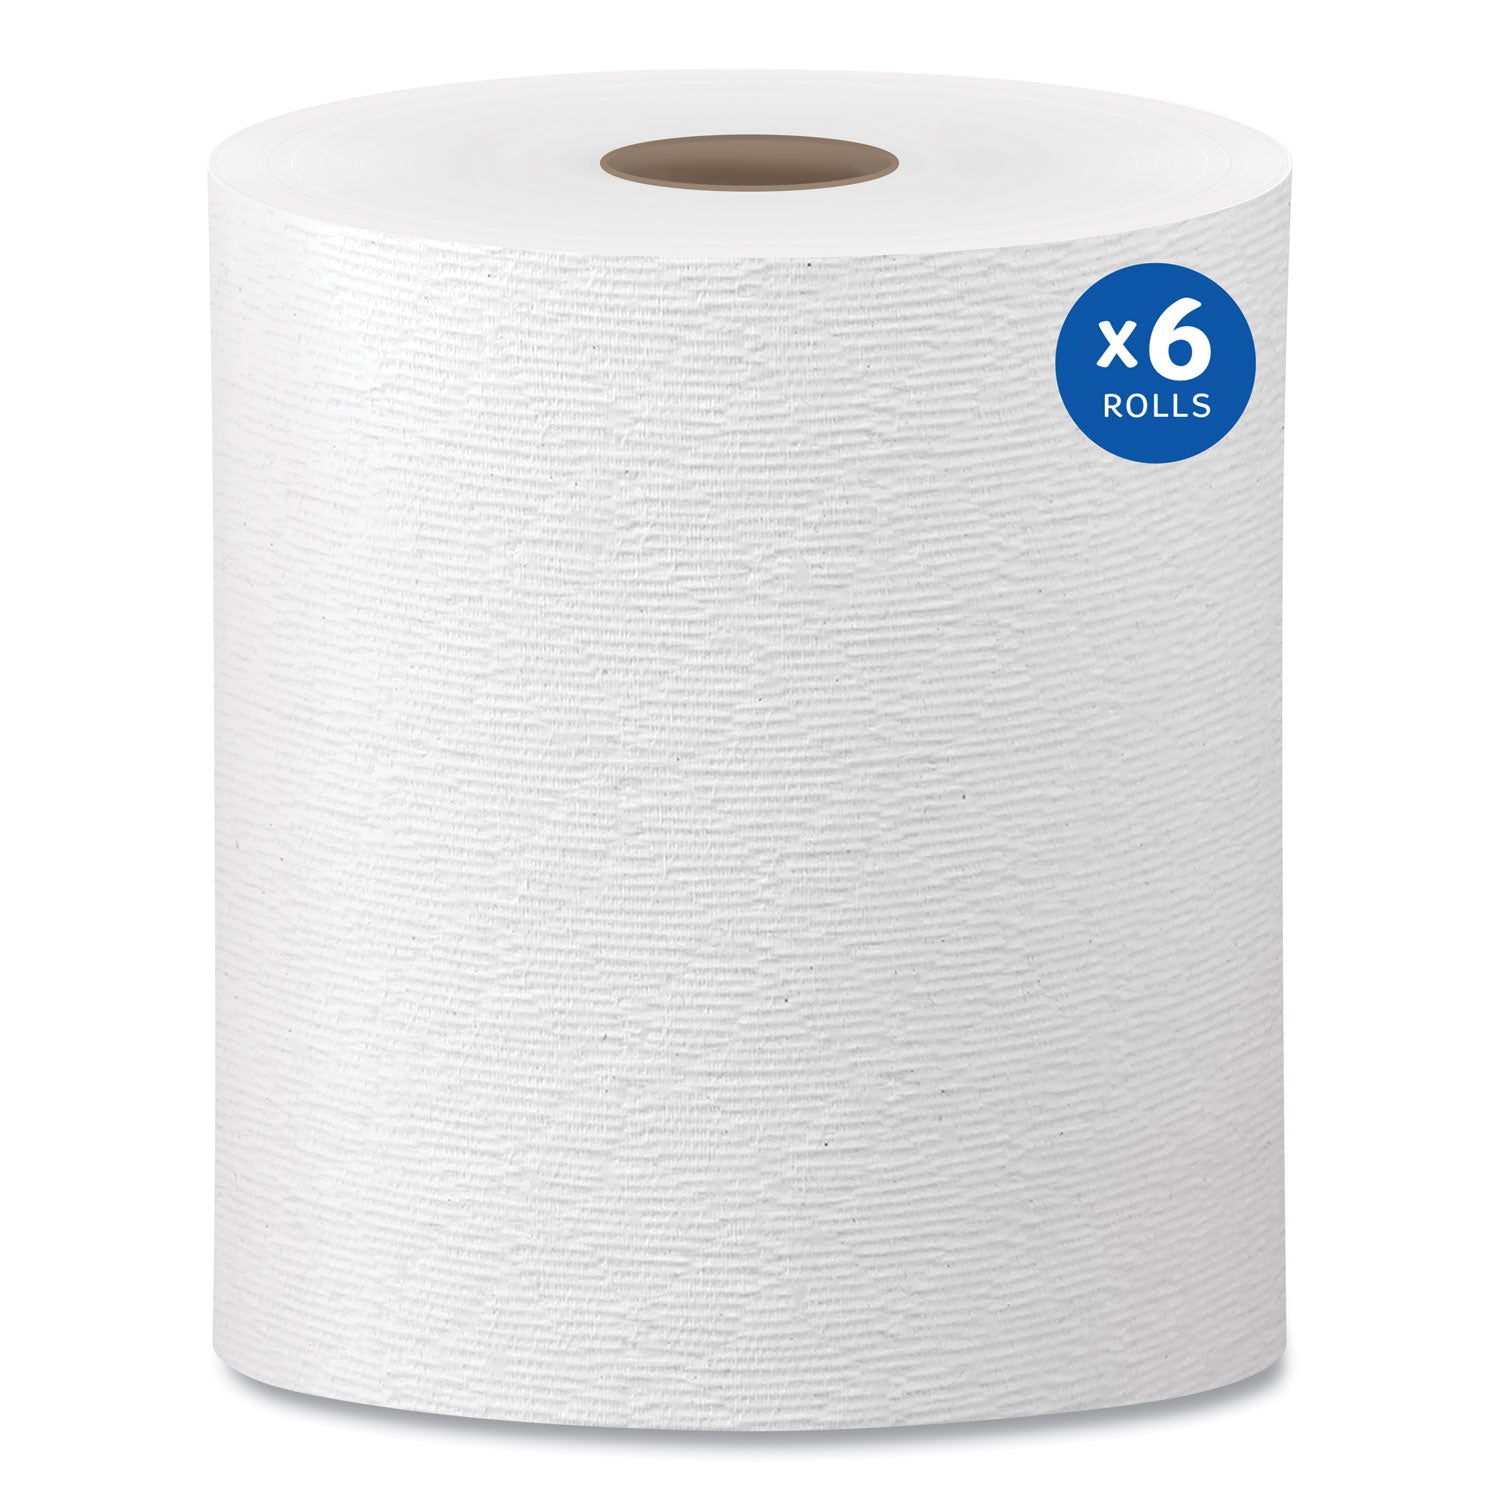 Hard Roll Paper Towels with Premium Absorbency Pockets, 1-Ply, 8" x 600 ft, 1.75" Core, White, 6 Rolls/Carton - 